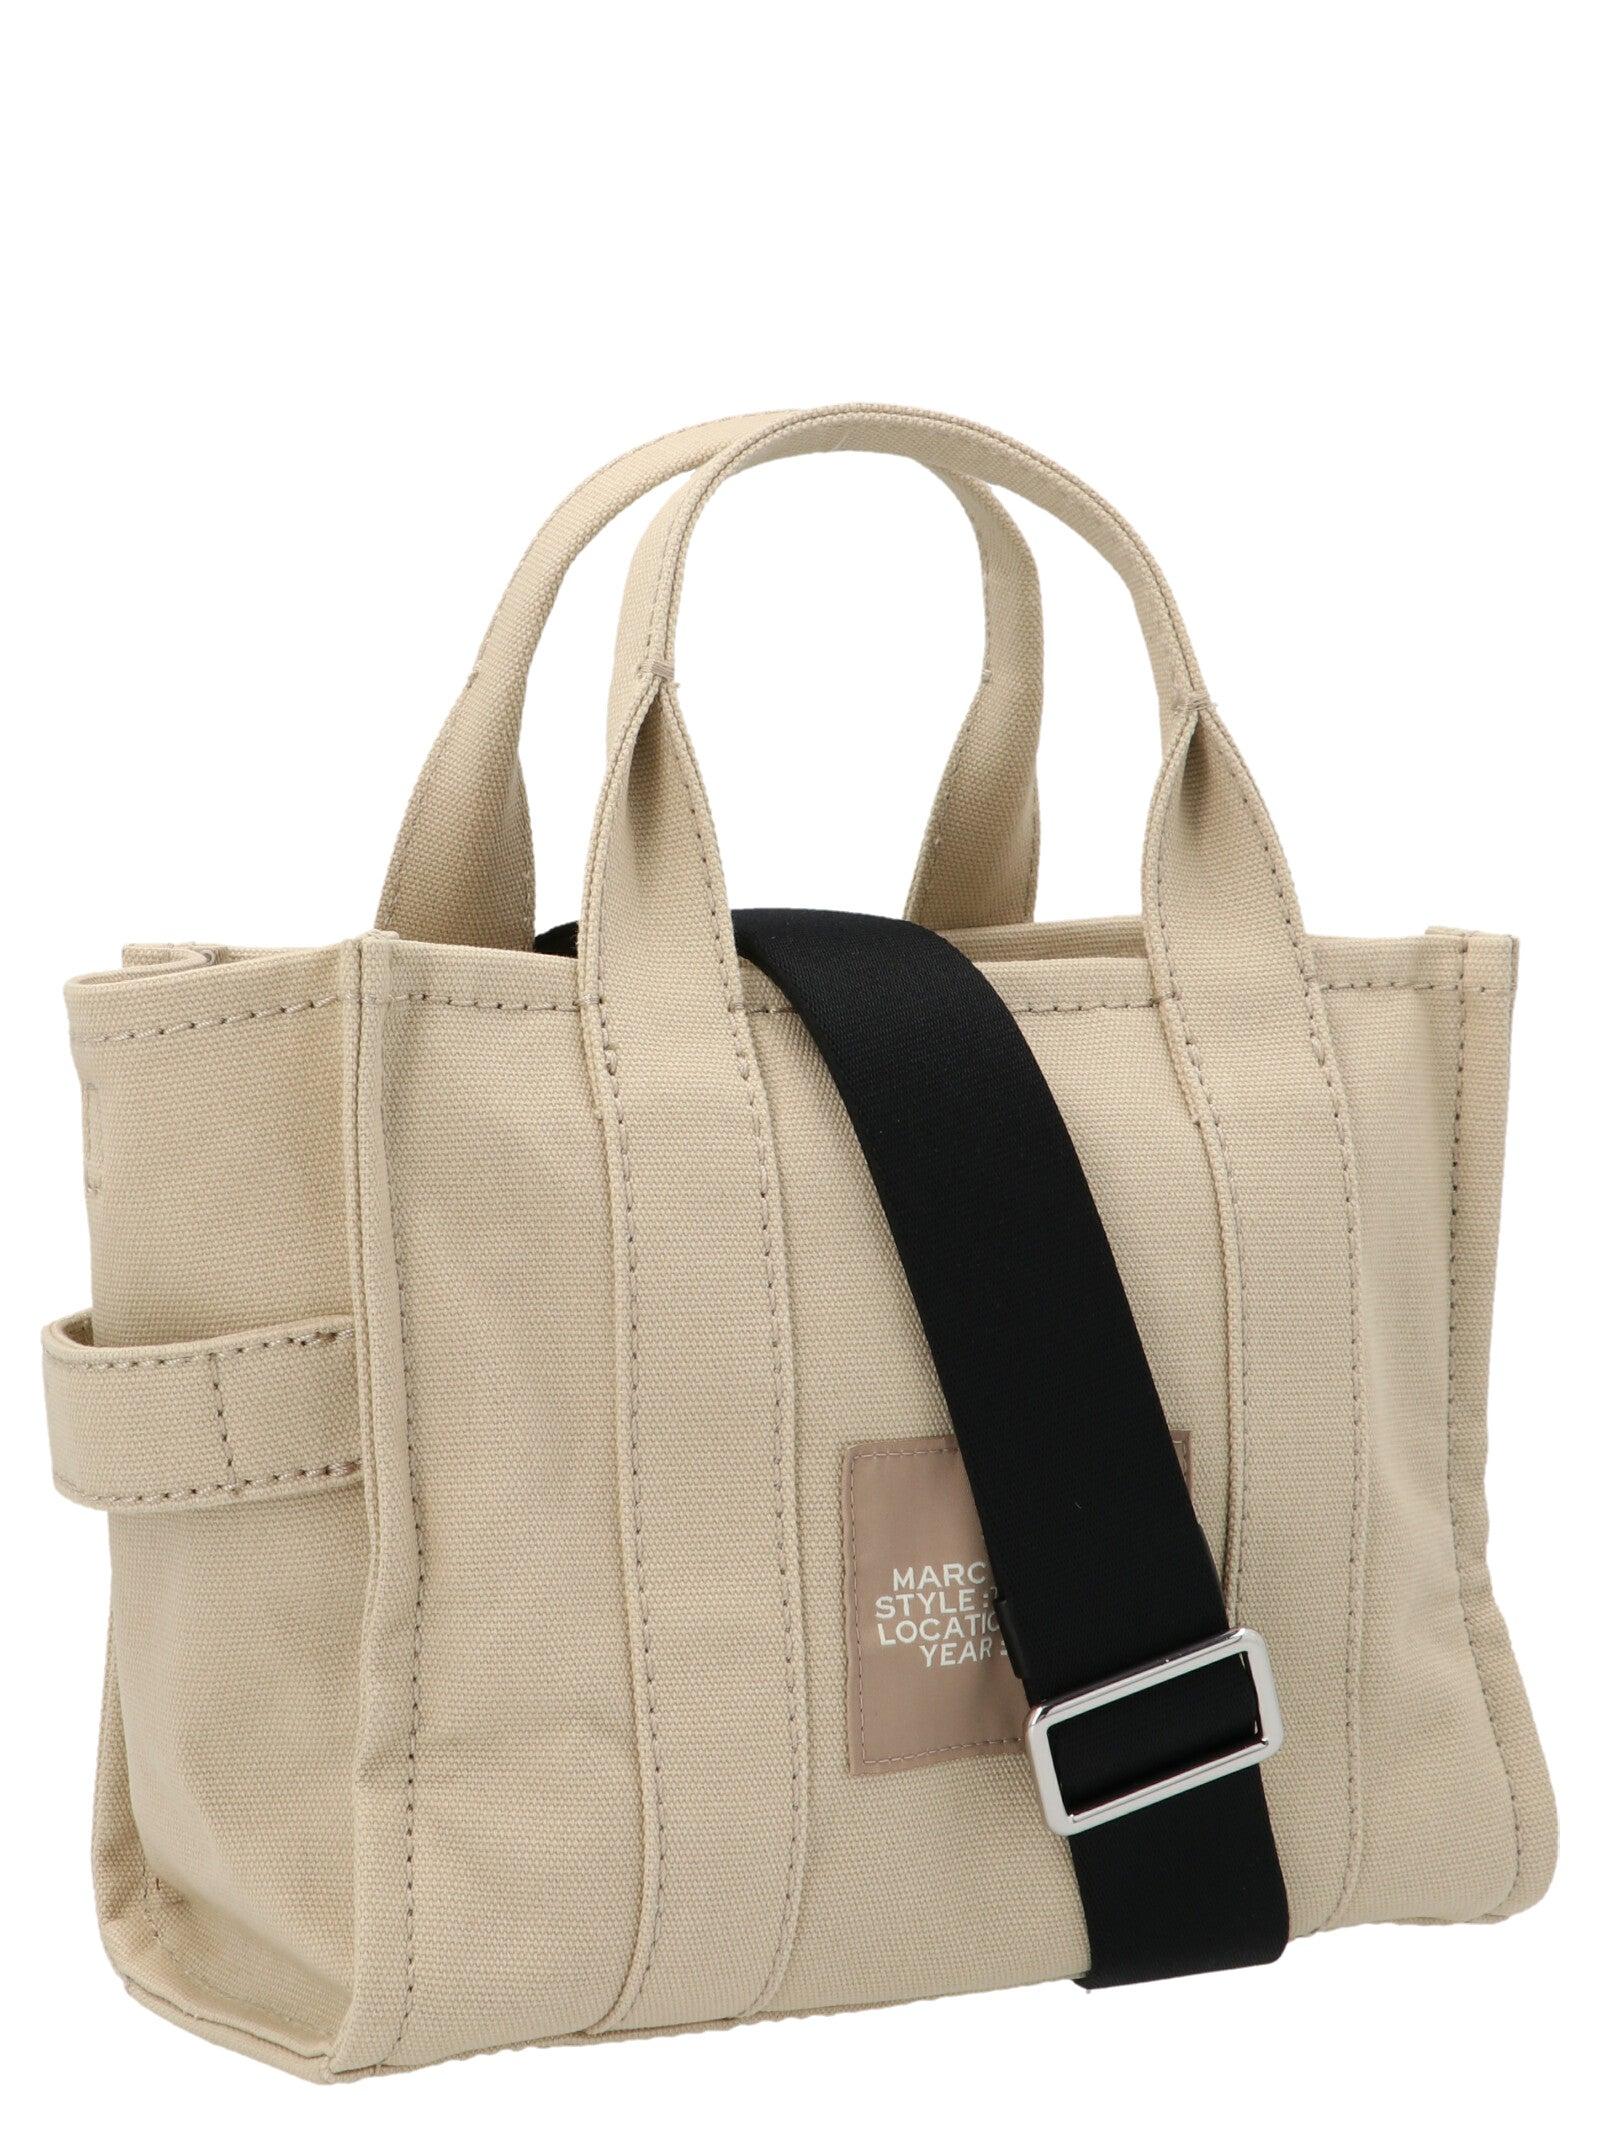 Marc Jacobs 'traveler Tote' Shopper in Natural | Lyst